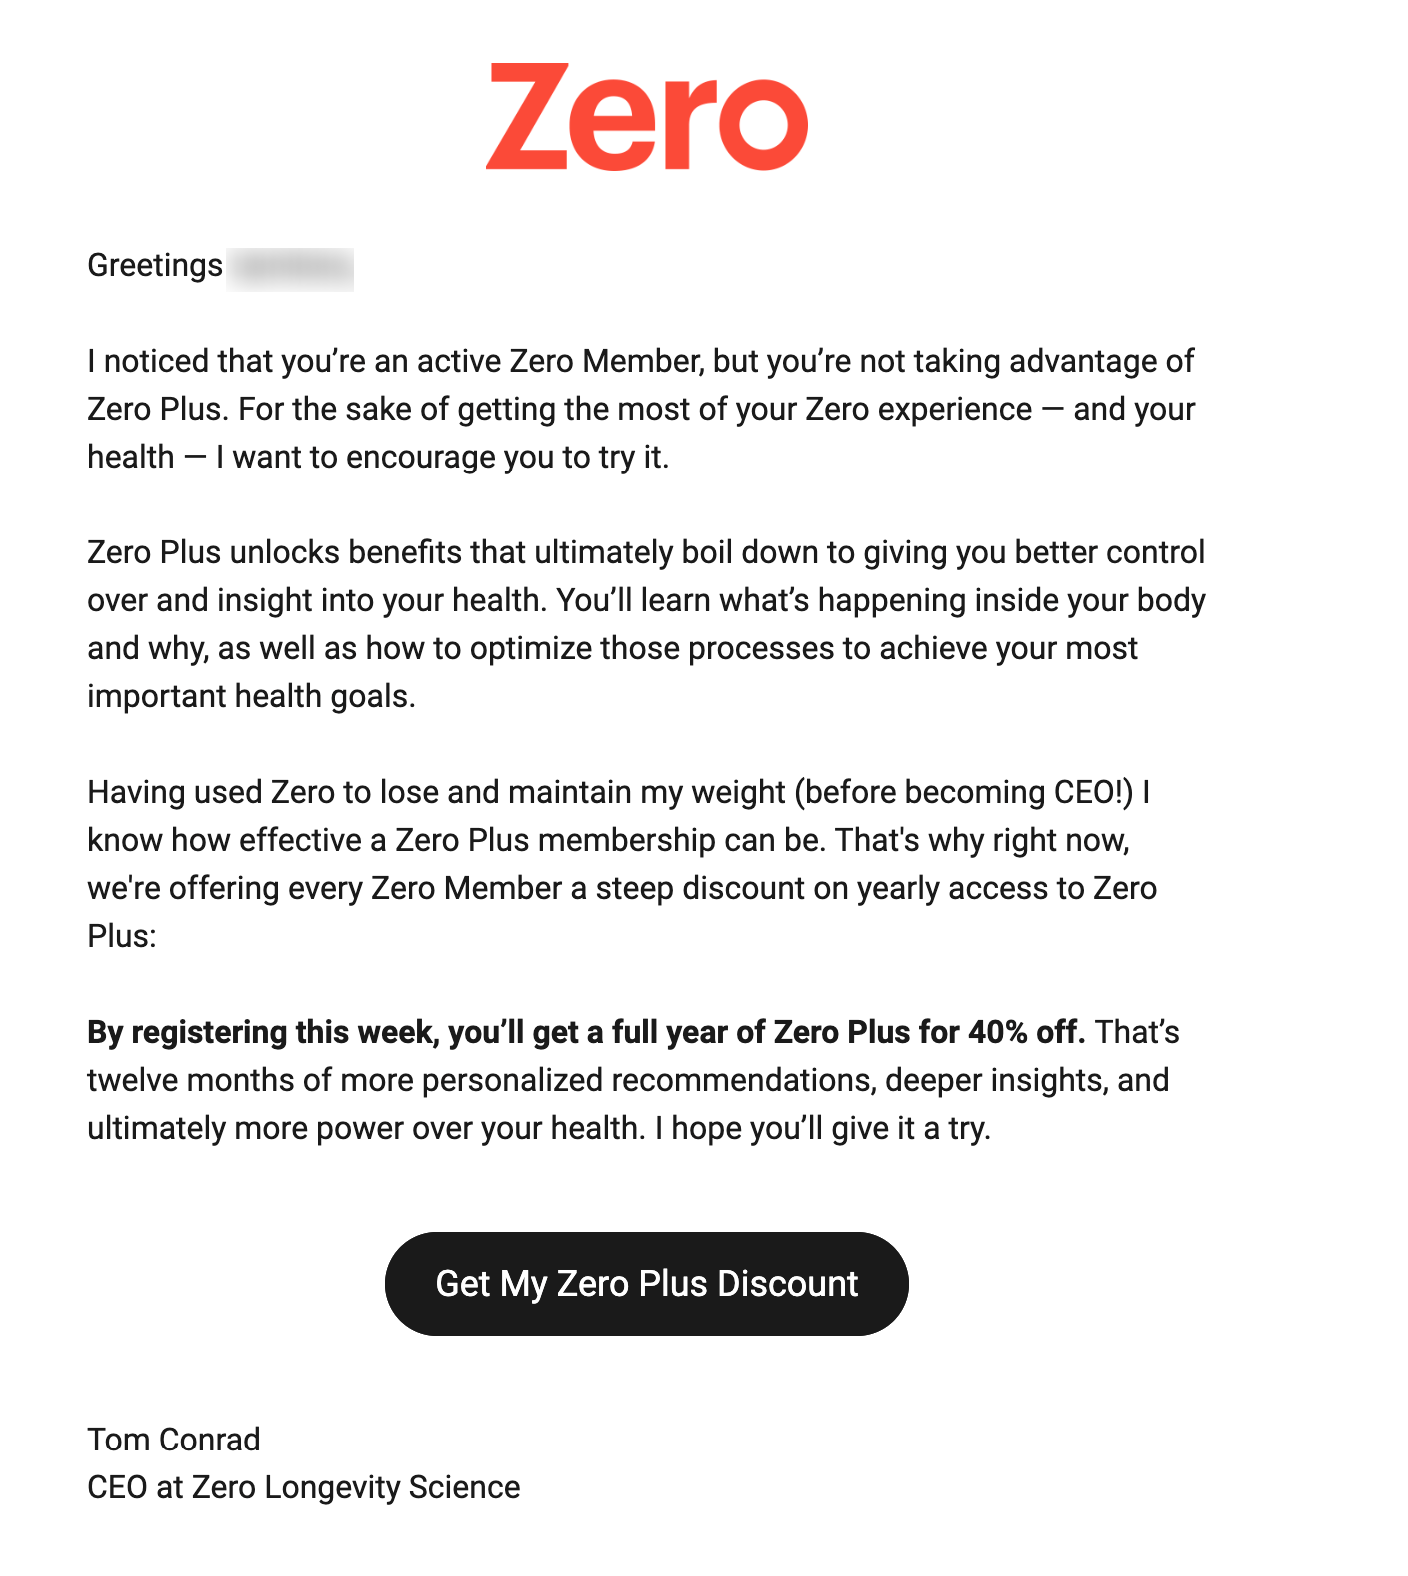 Email Engagement Content Ideas: Screenshot of Zero's email urging users to avail of a limited discount